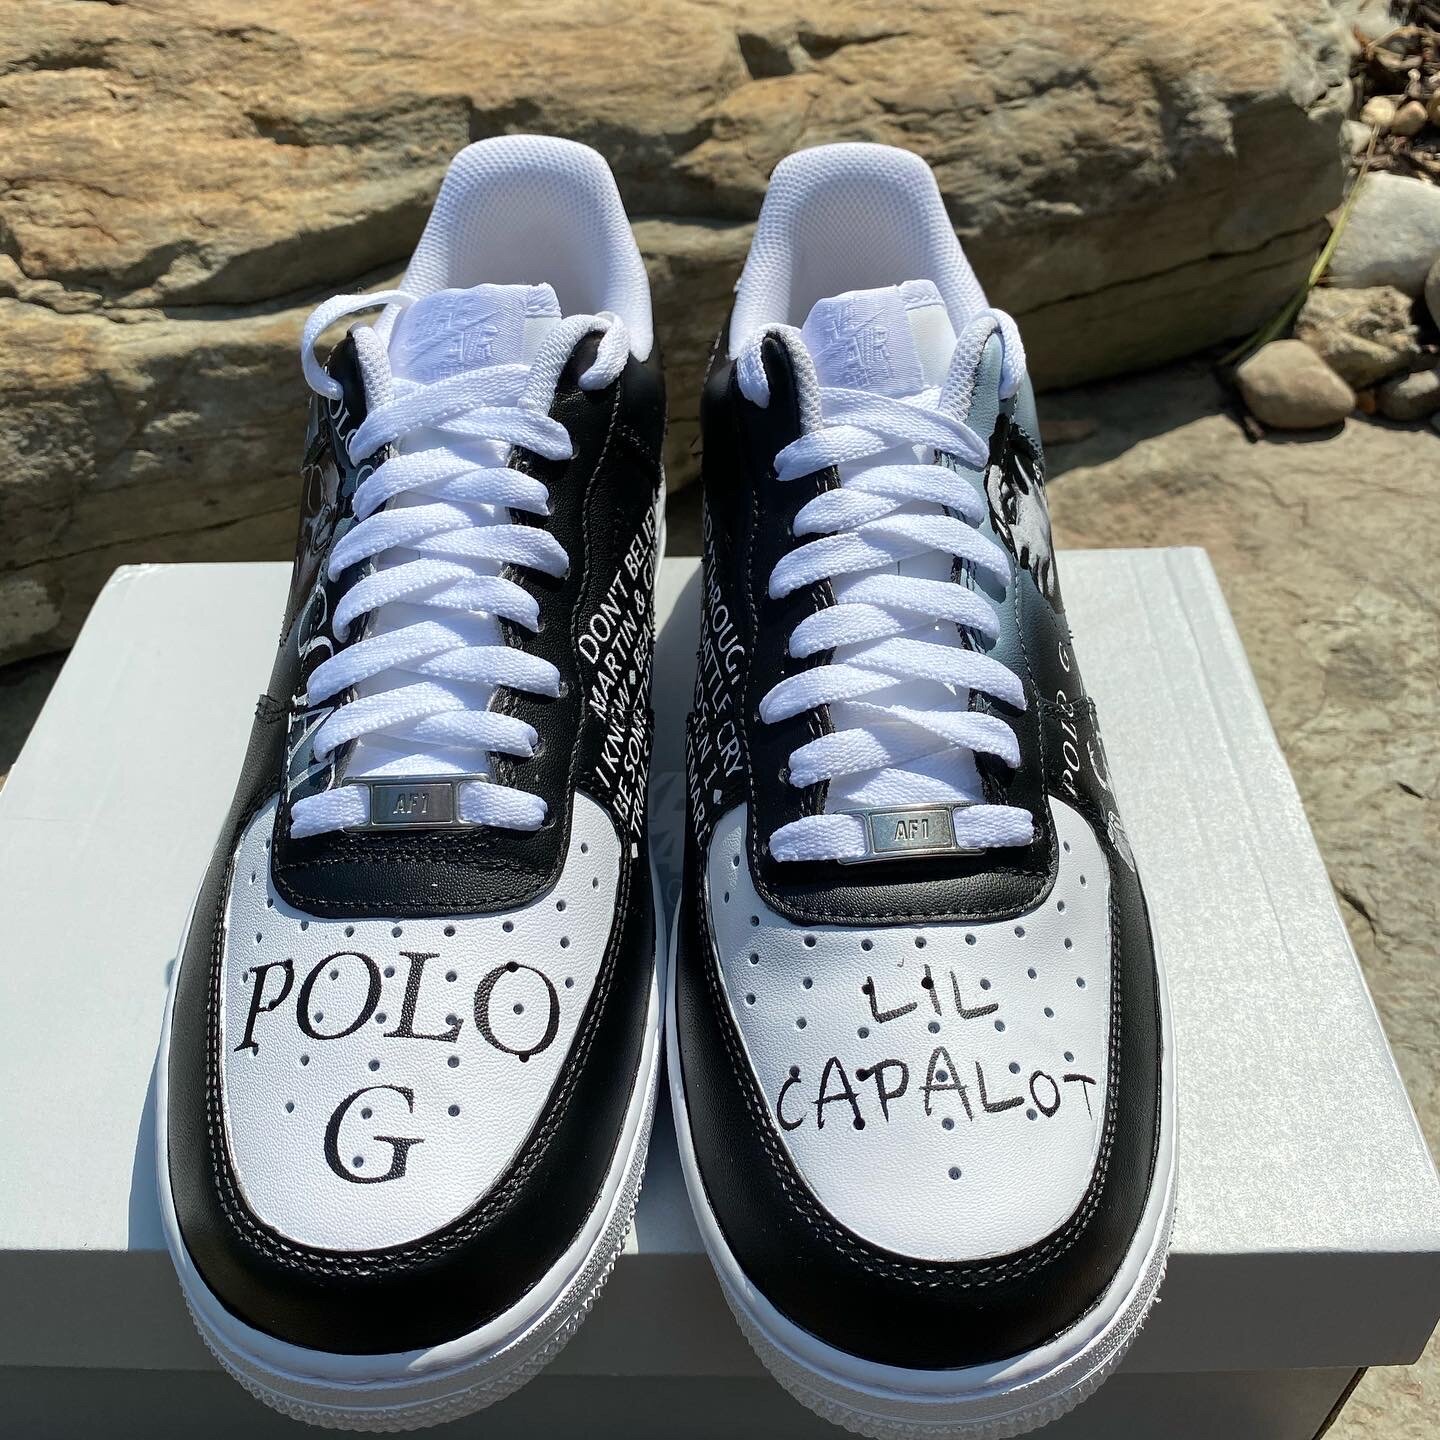 Custom Polo G Lil Capalot Nike Air Force 1 '07 Low - “The Goat